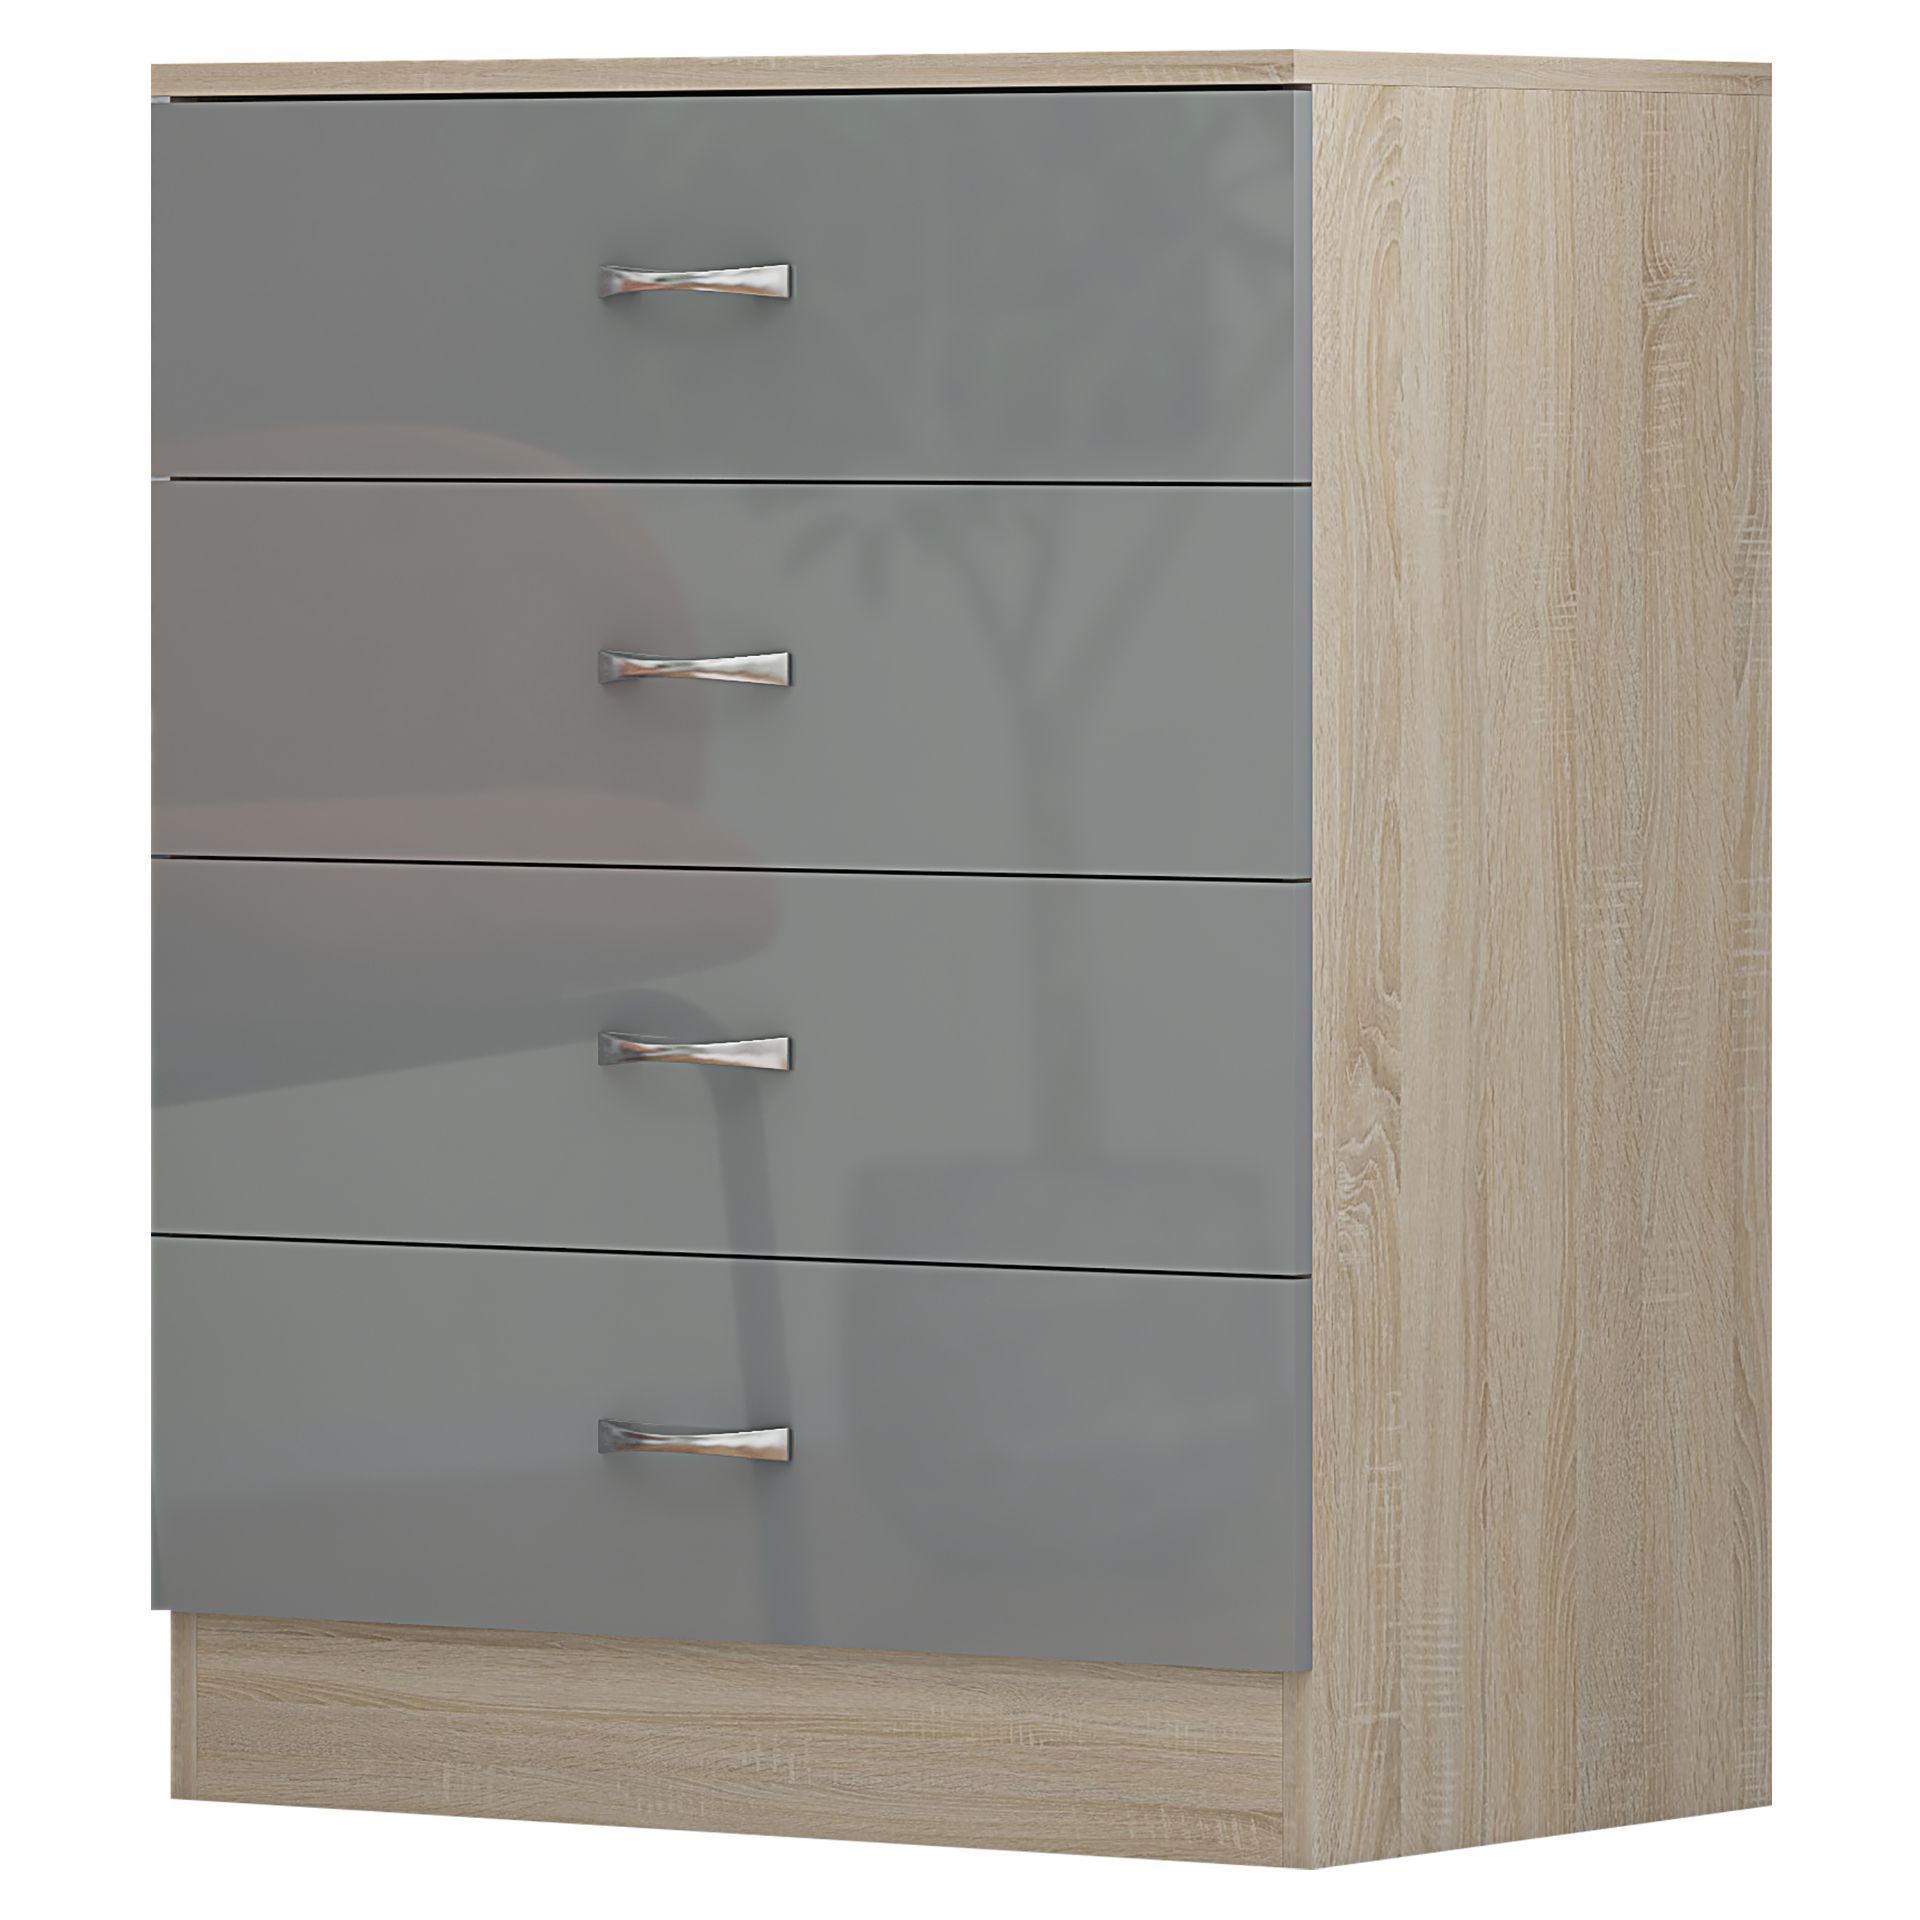 JOBLOT OF 10 X STUNNING CHEST OF DRAWERS - HIGH GLOSS GREY ON SONOMA OAK FRAME - Image 2 of 7